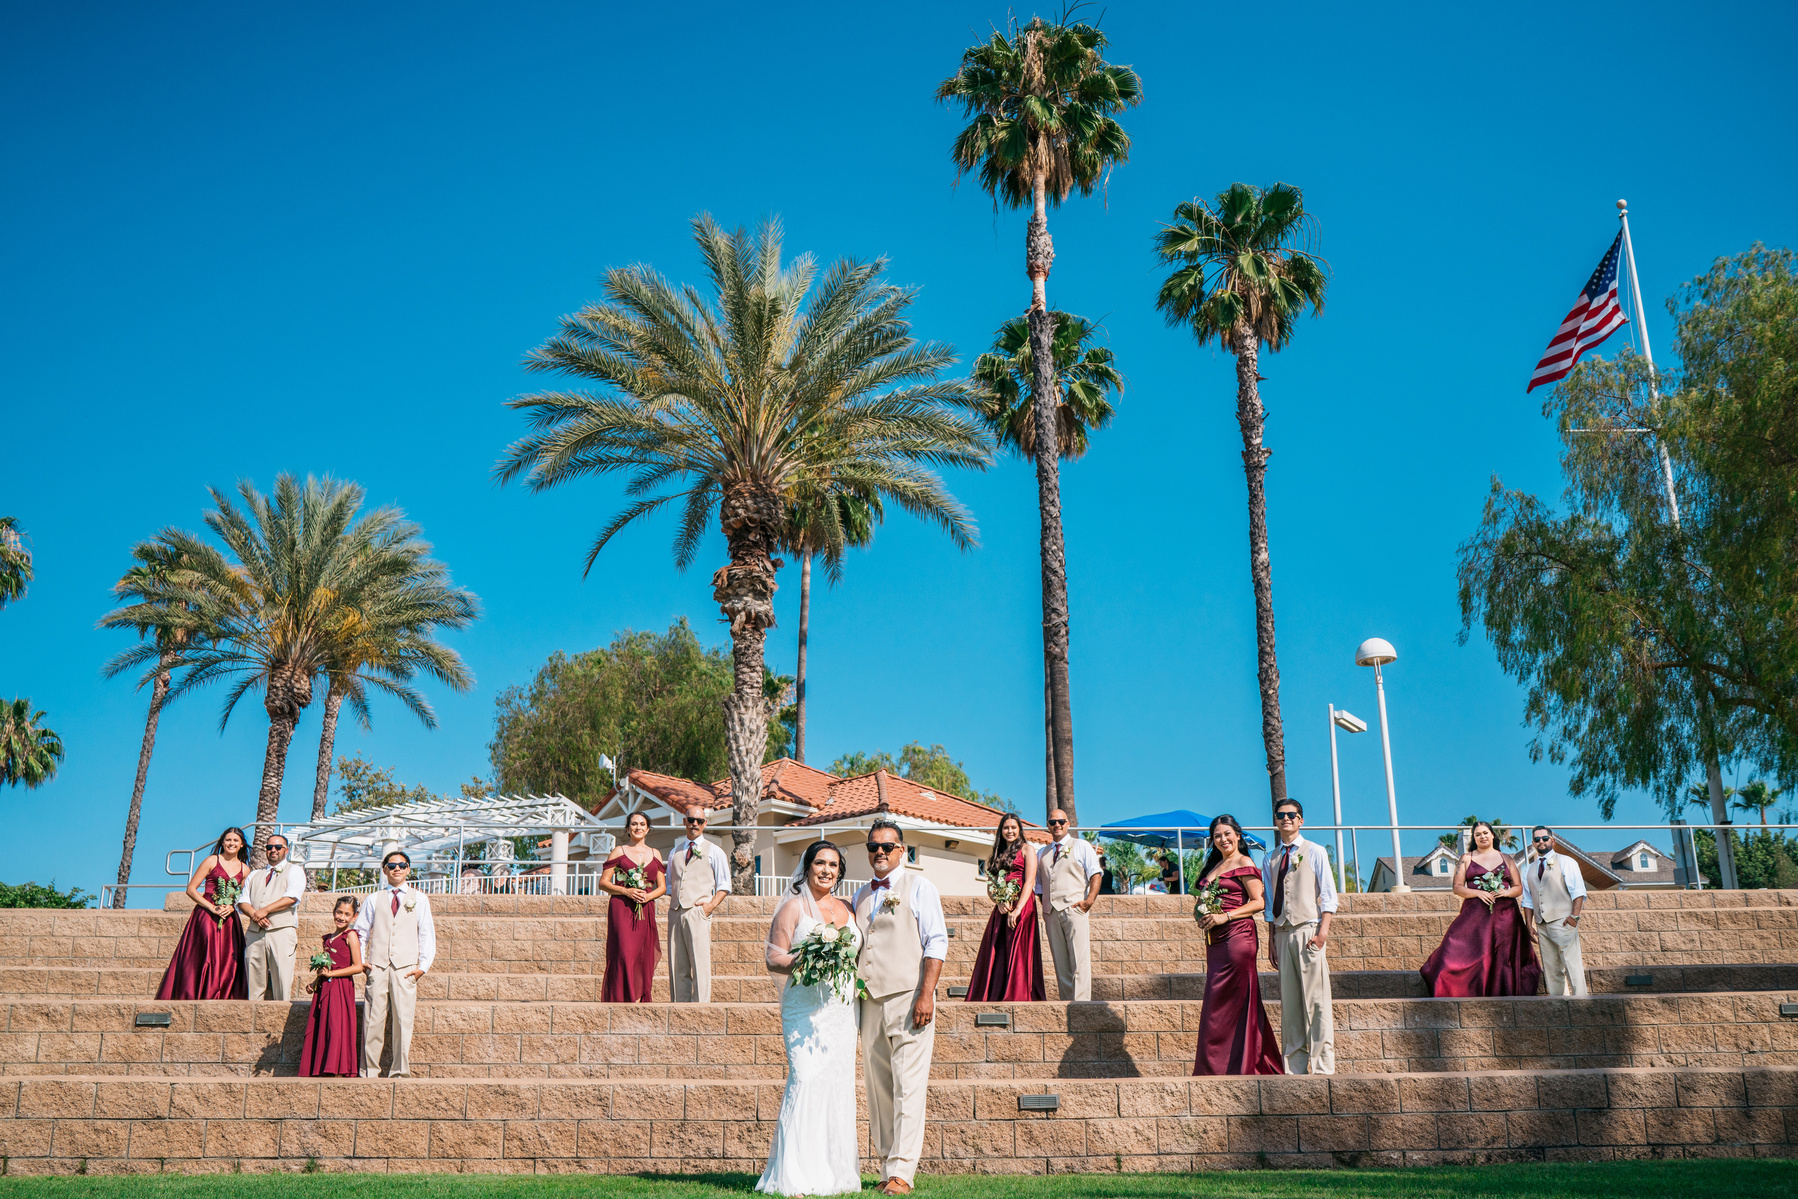 vanity fair style grand bridal party portrait with bride and groom palm trees and american flag canyon lake california wedding photography temecula southern california